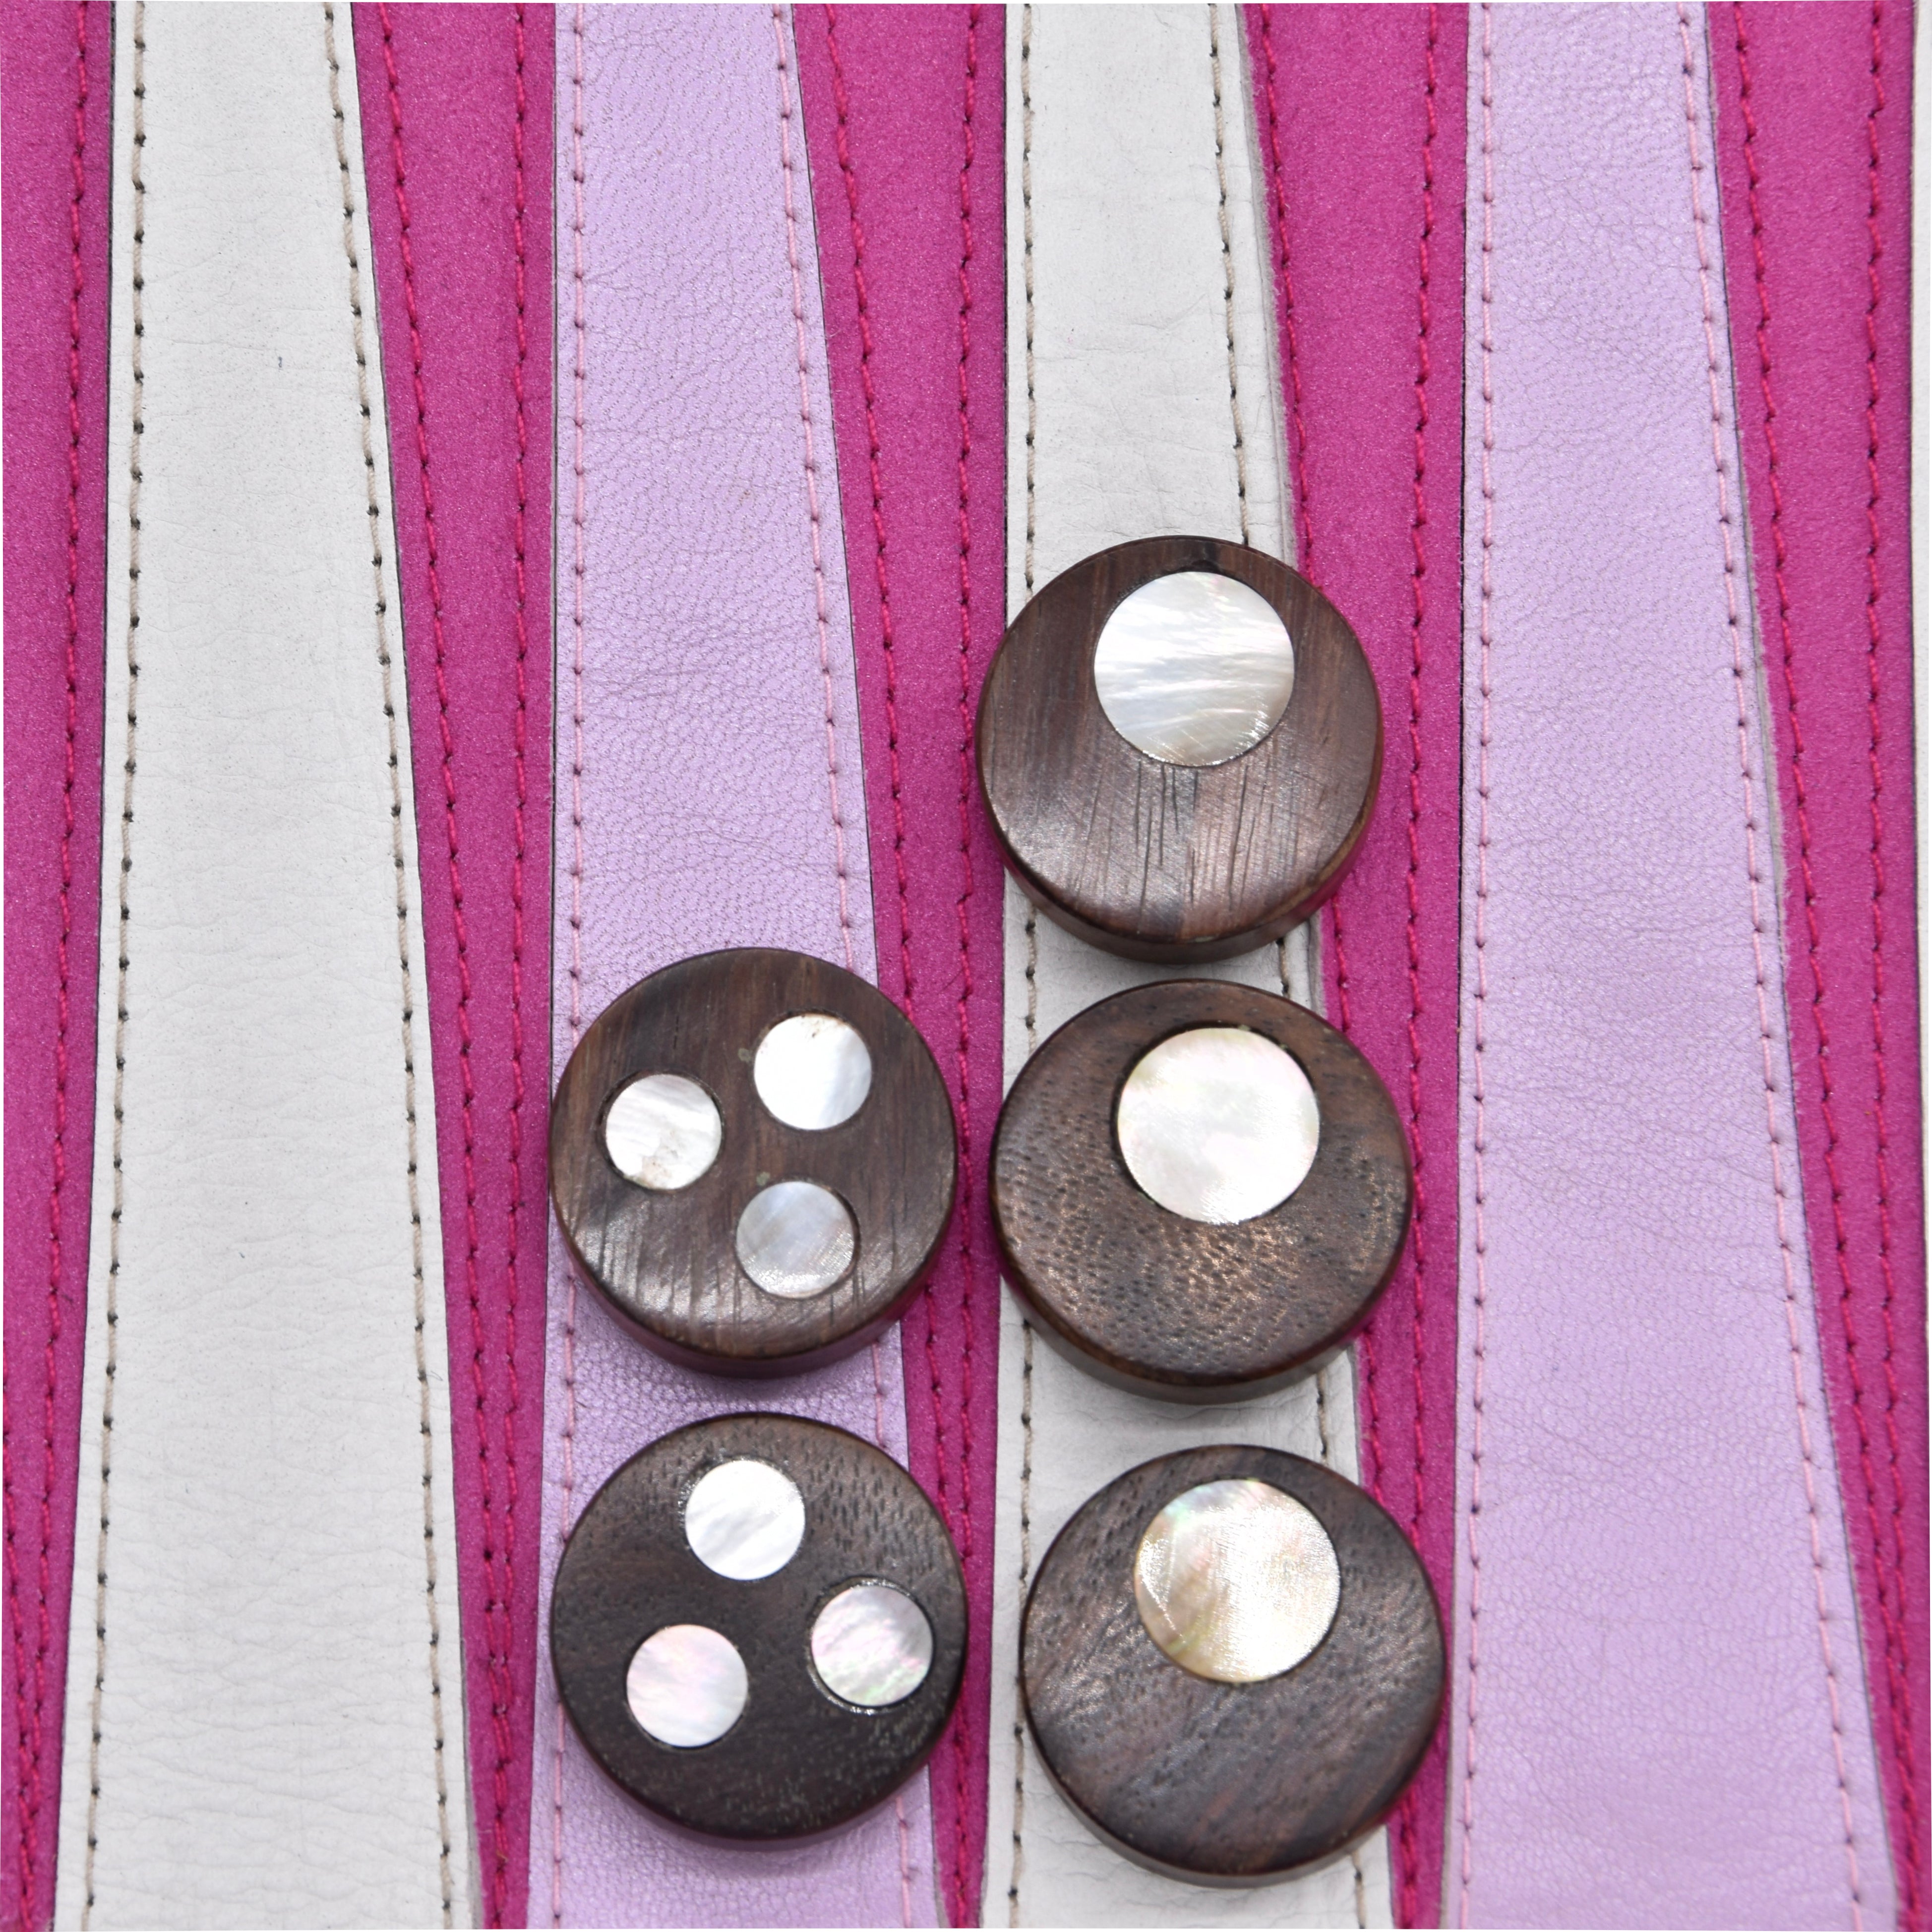 Fuchsia backgammon set with wood and mother of pearl inlay checkers